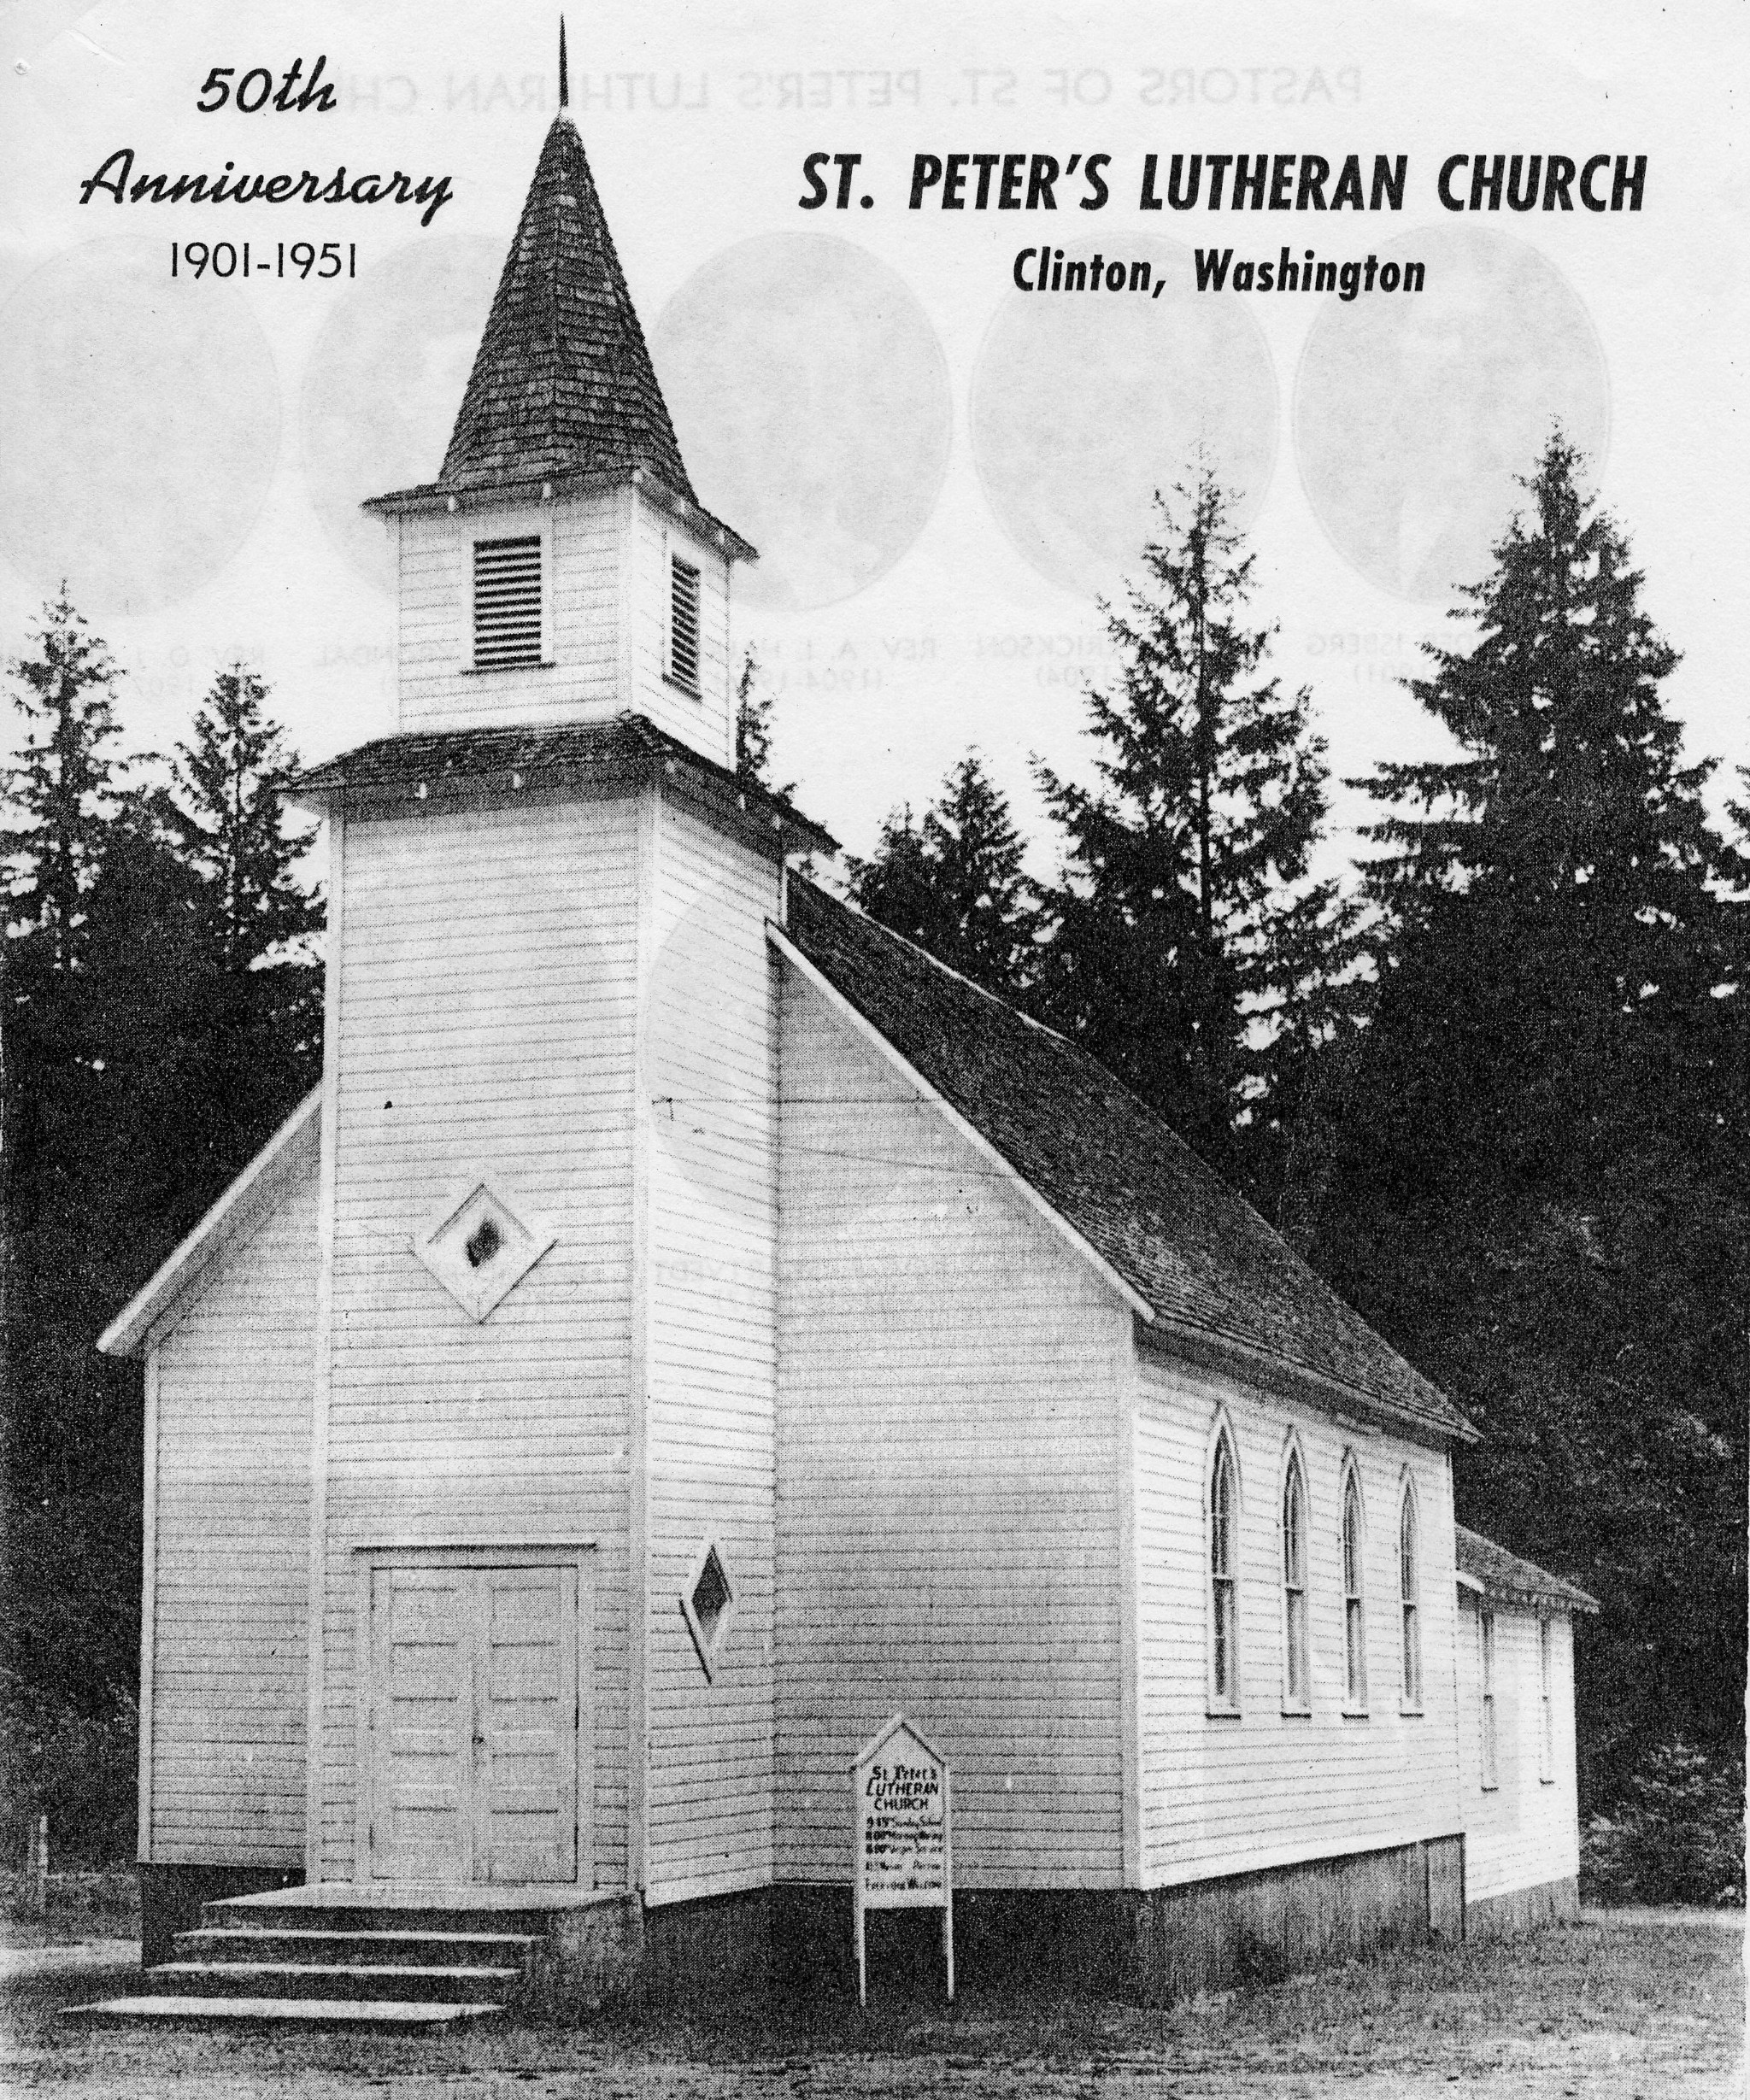 St. Peter’s Lutheran Church in Clinton